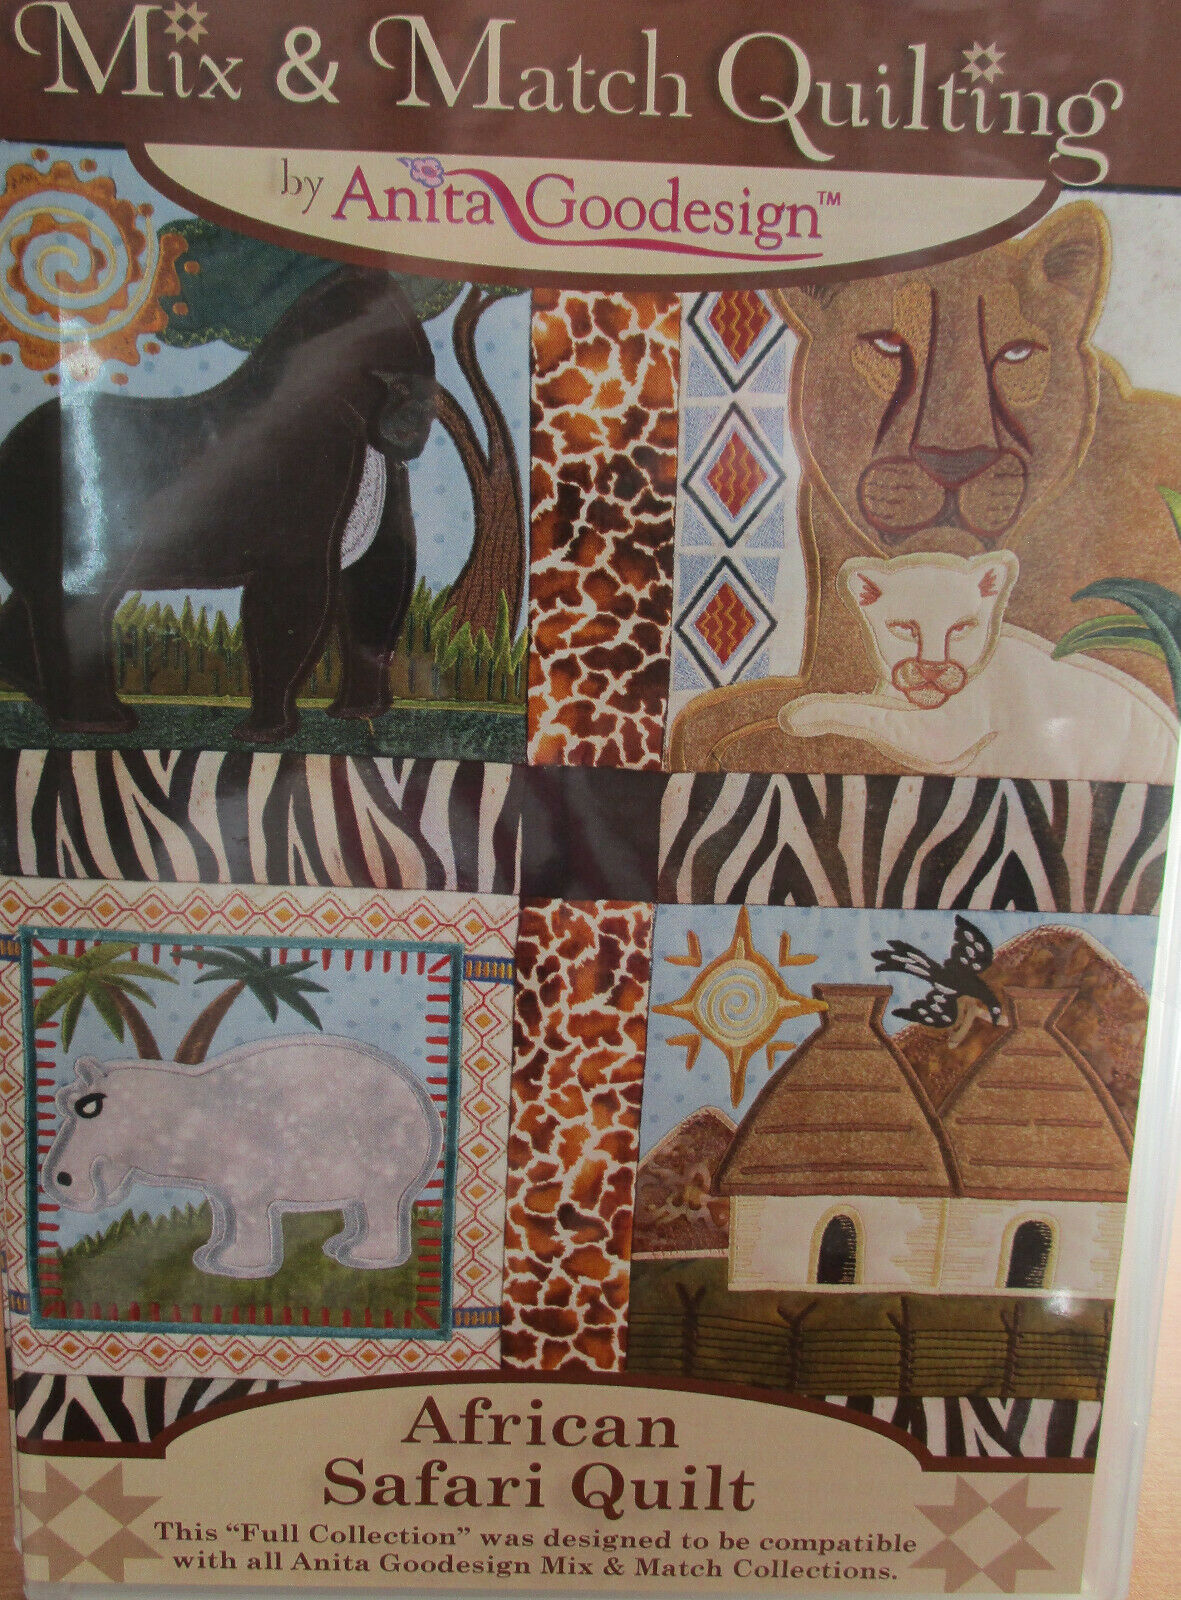 African Safari Quilt - Full Mix & Match Collection